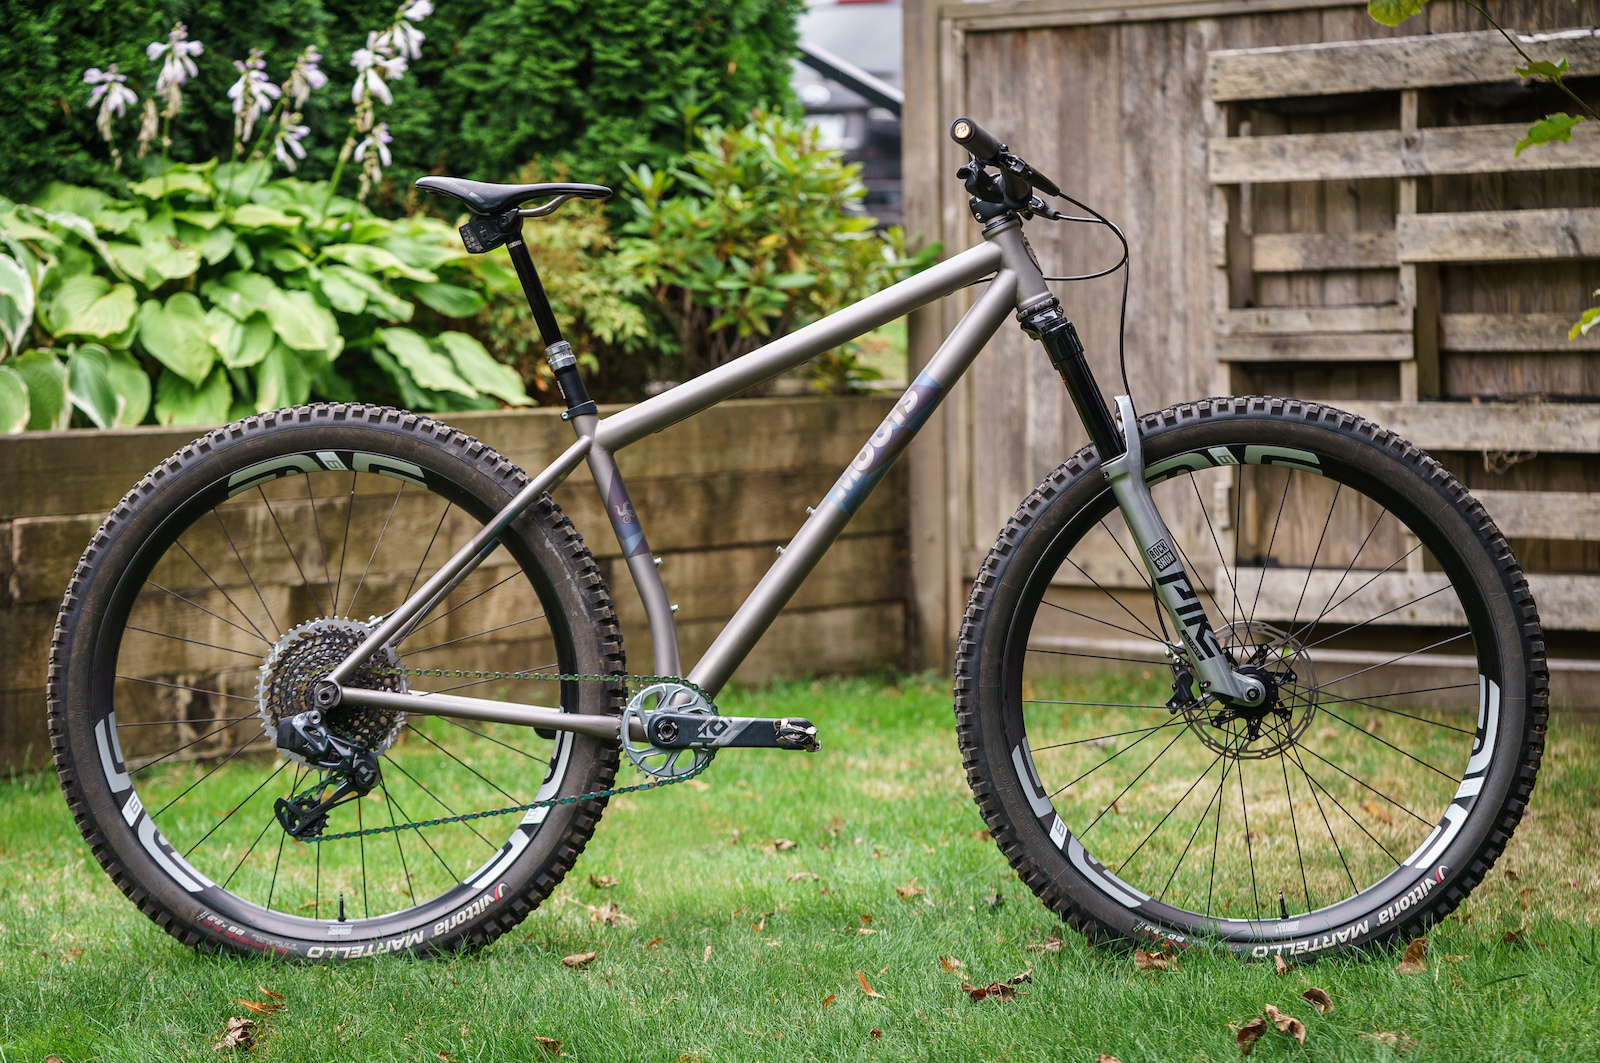 Not a Review: The Moots Womble is More than Just a Boomer Bike